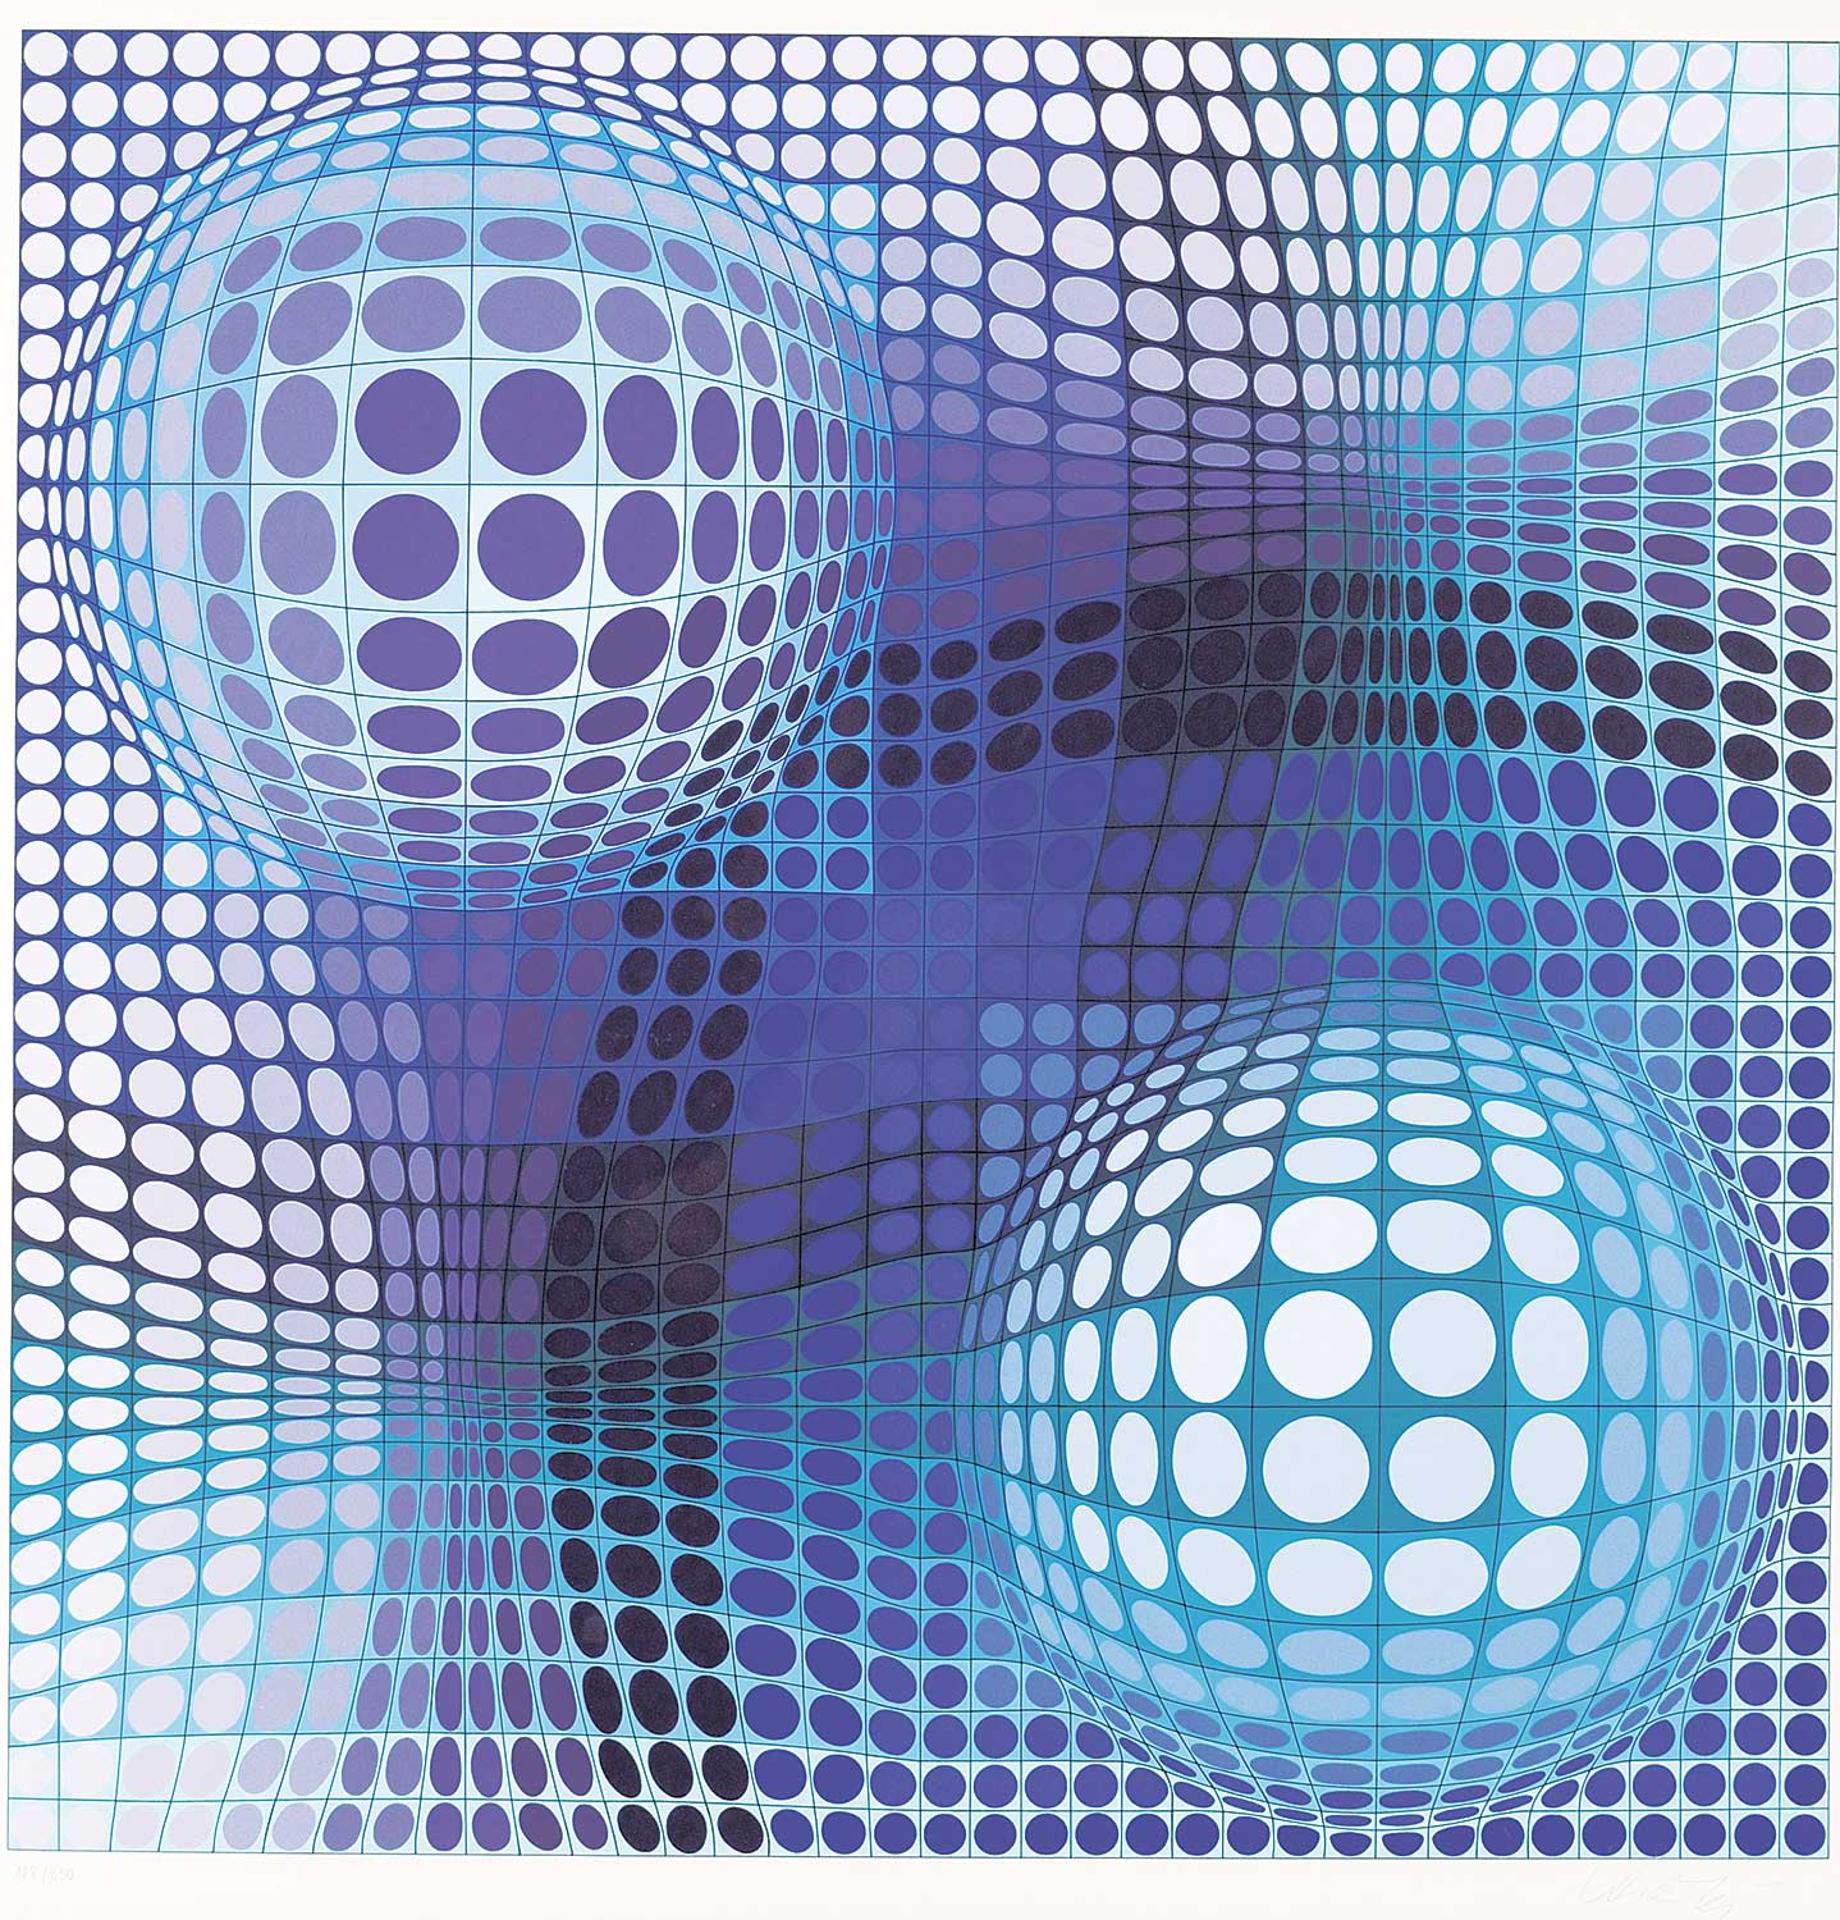 Victor Vasarely (1906-1997) - Untitled - Blue and Purple Sphere Abstraction  #188/250